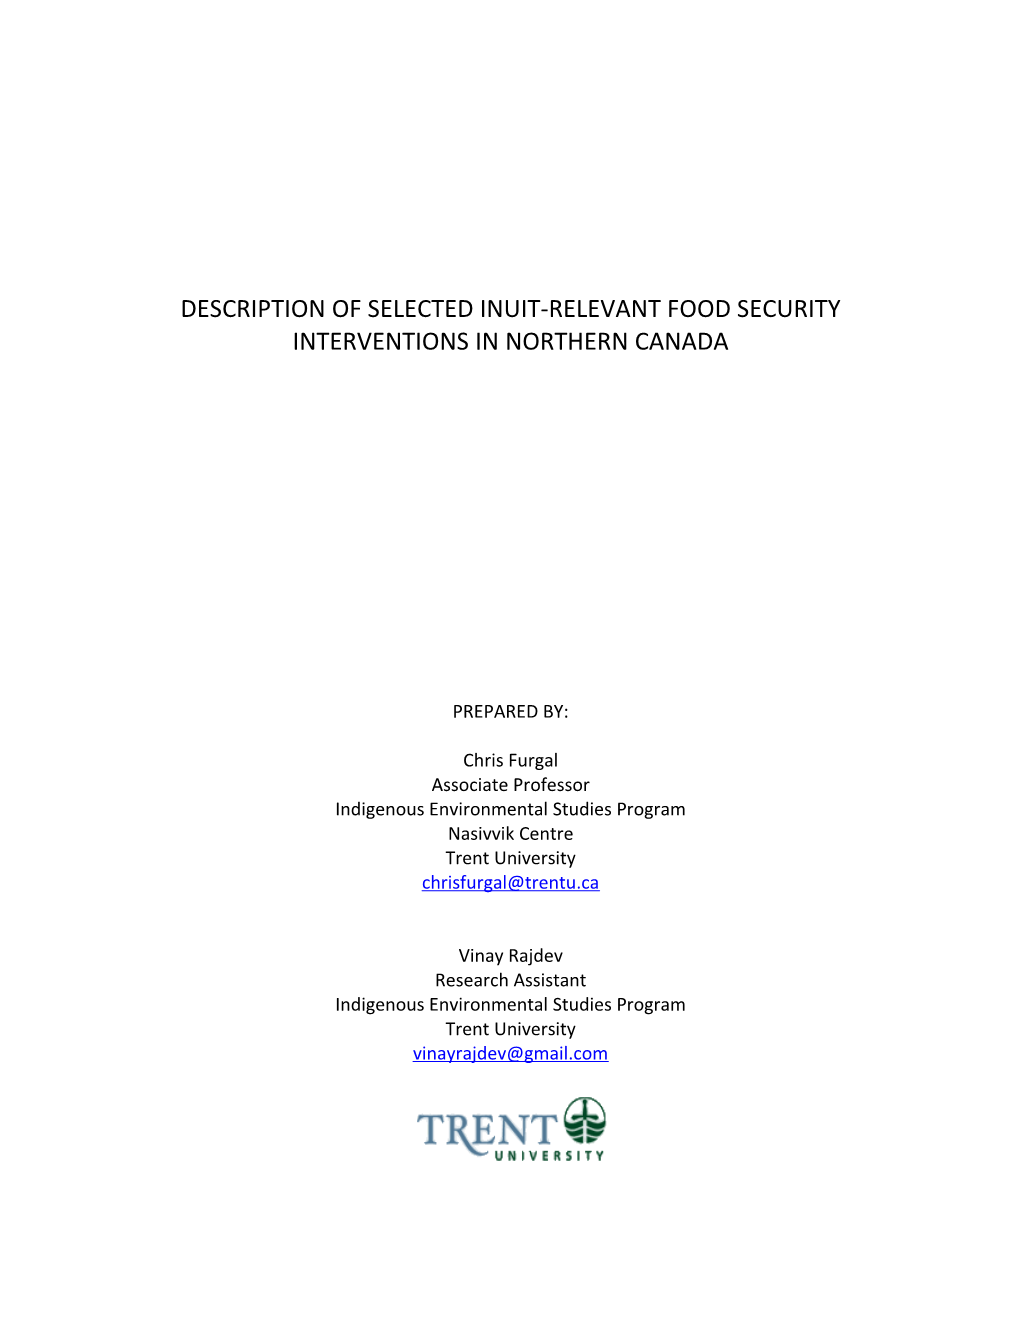 Description of Selected Inuit-Relevant Food Security Interventionsin Northern Canada